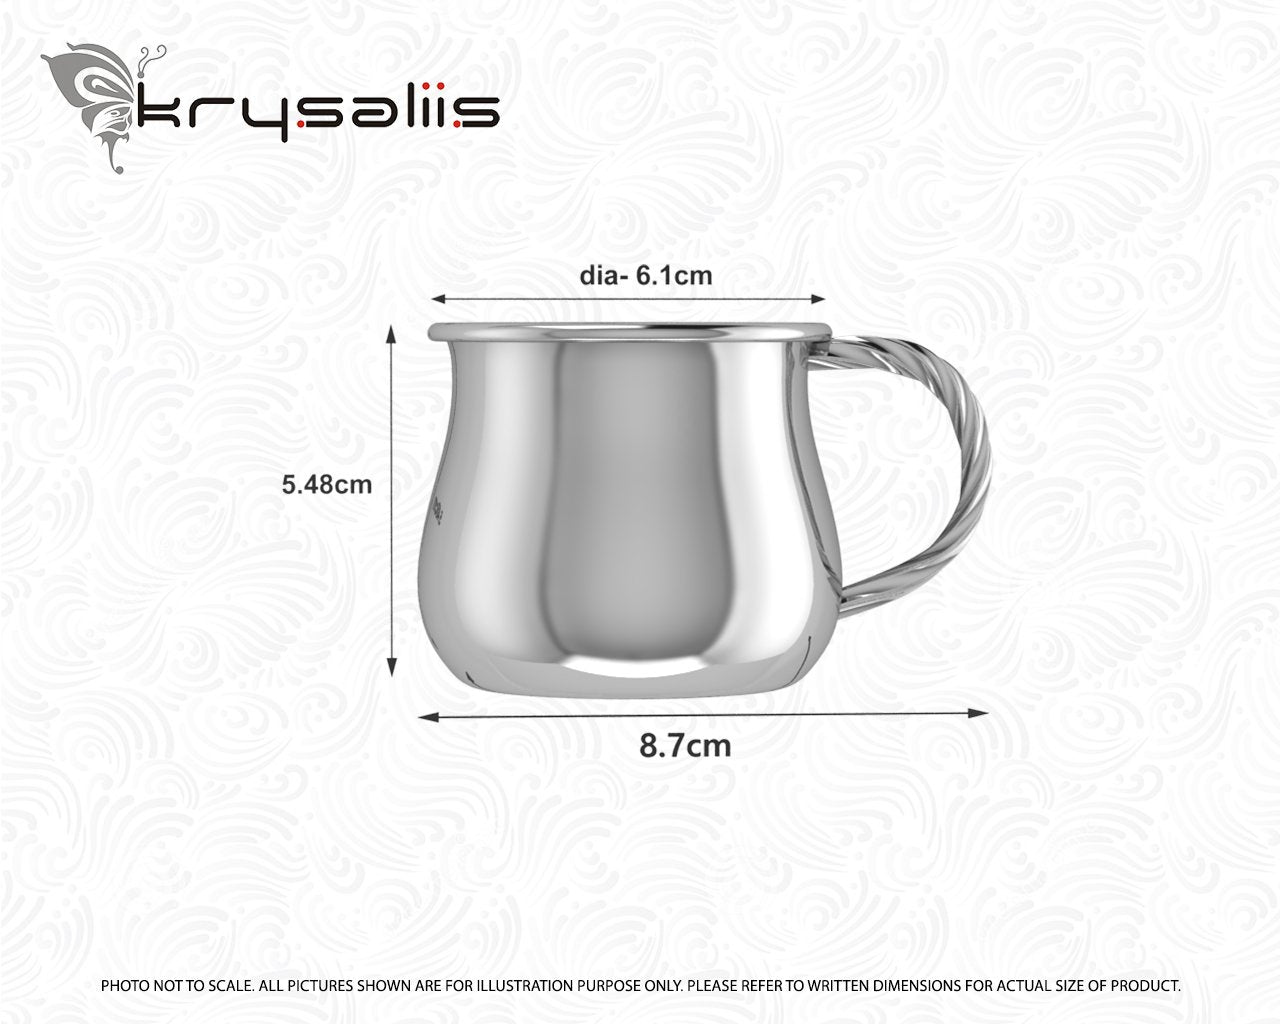 Spiral Silver Plated Baby Cup by Krysaliis